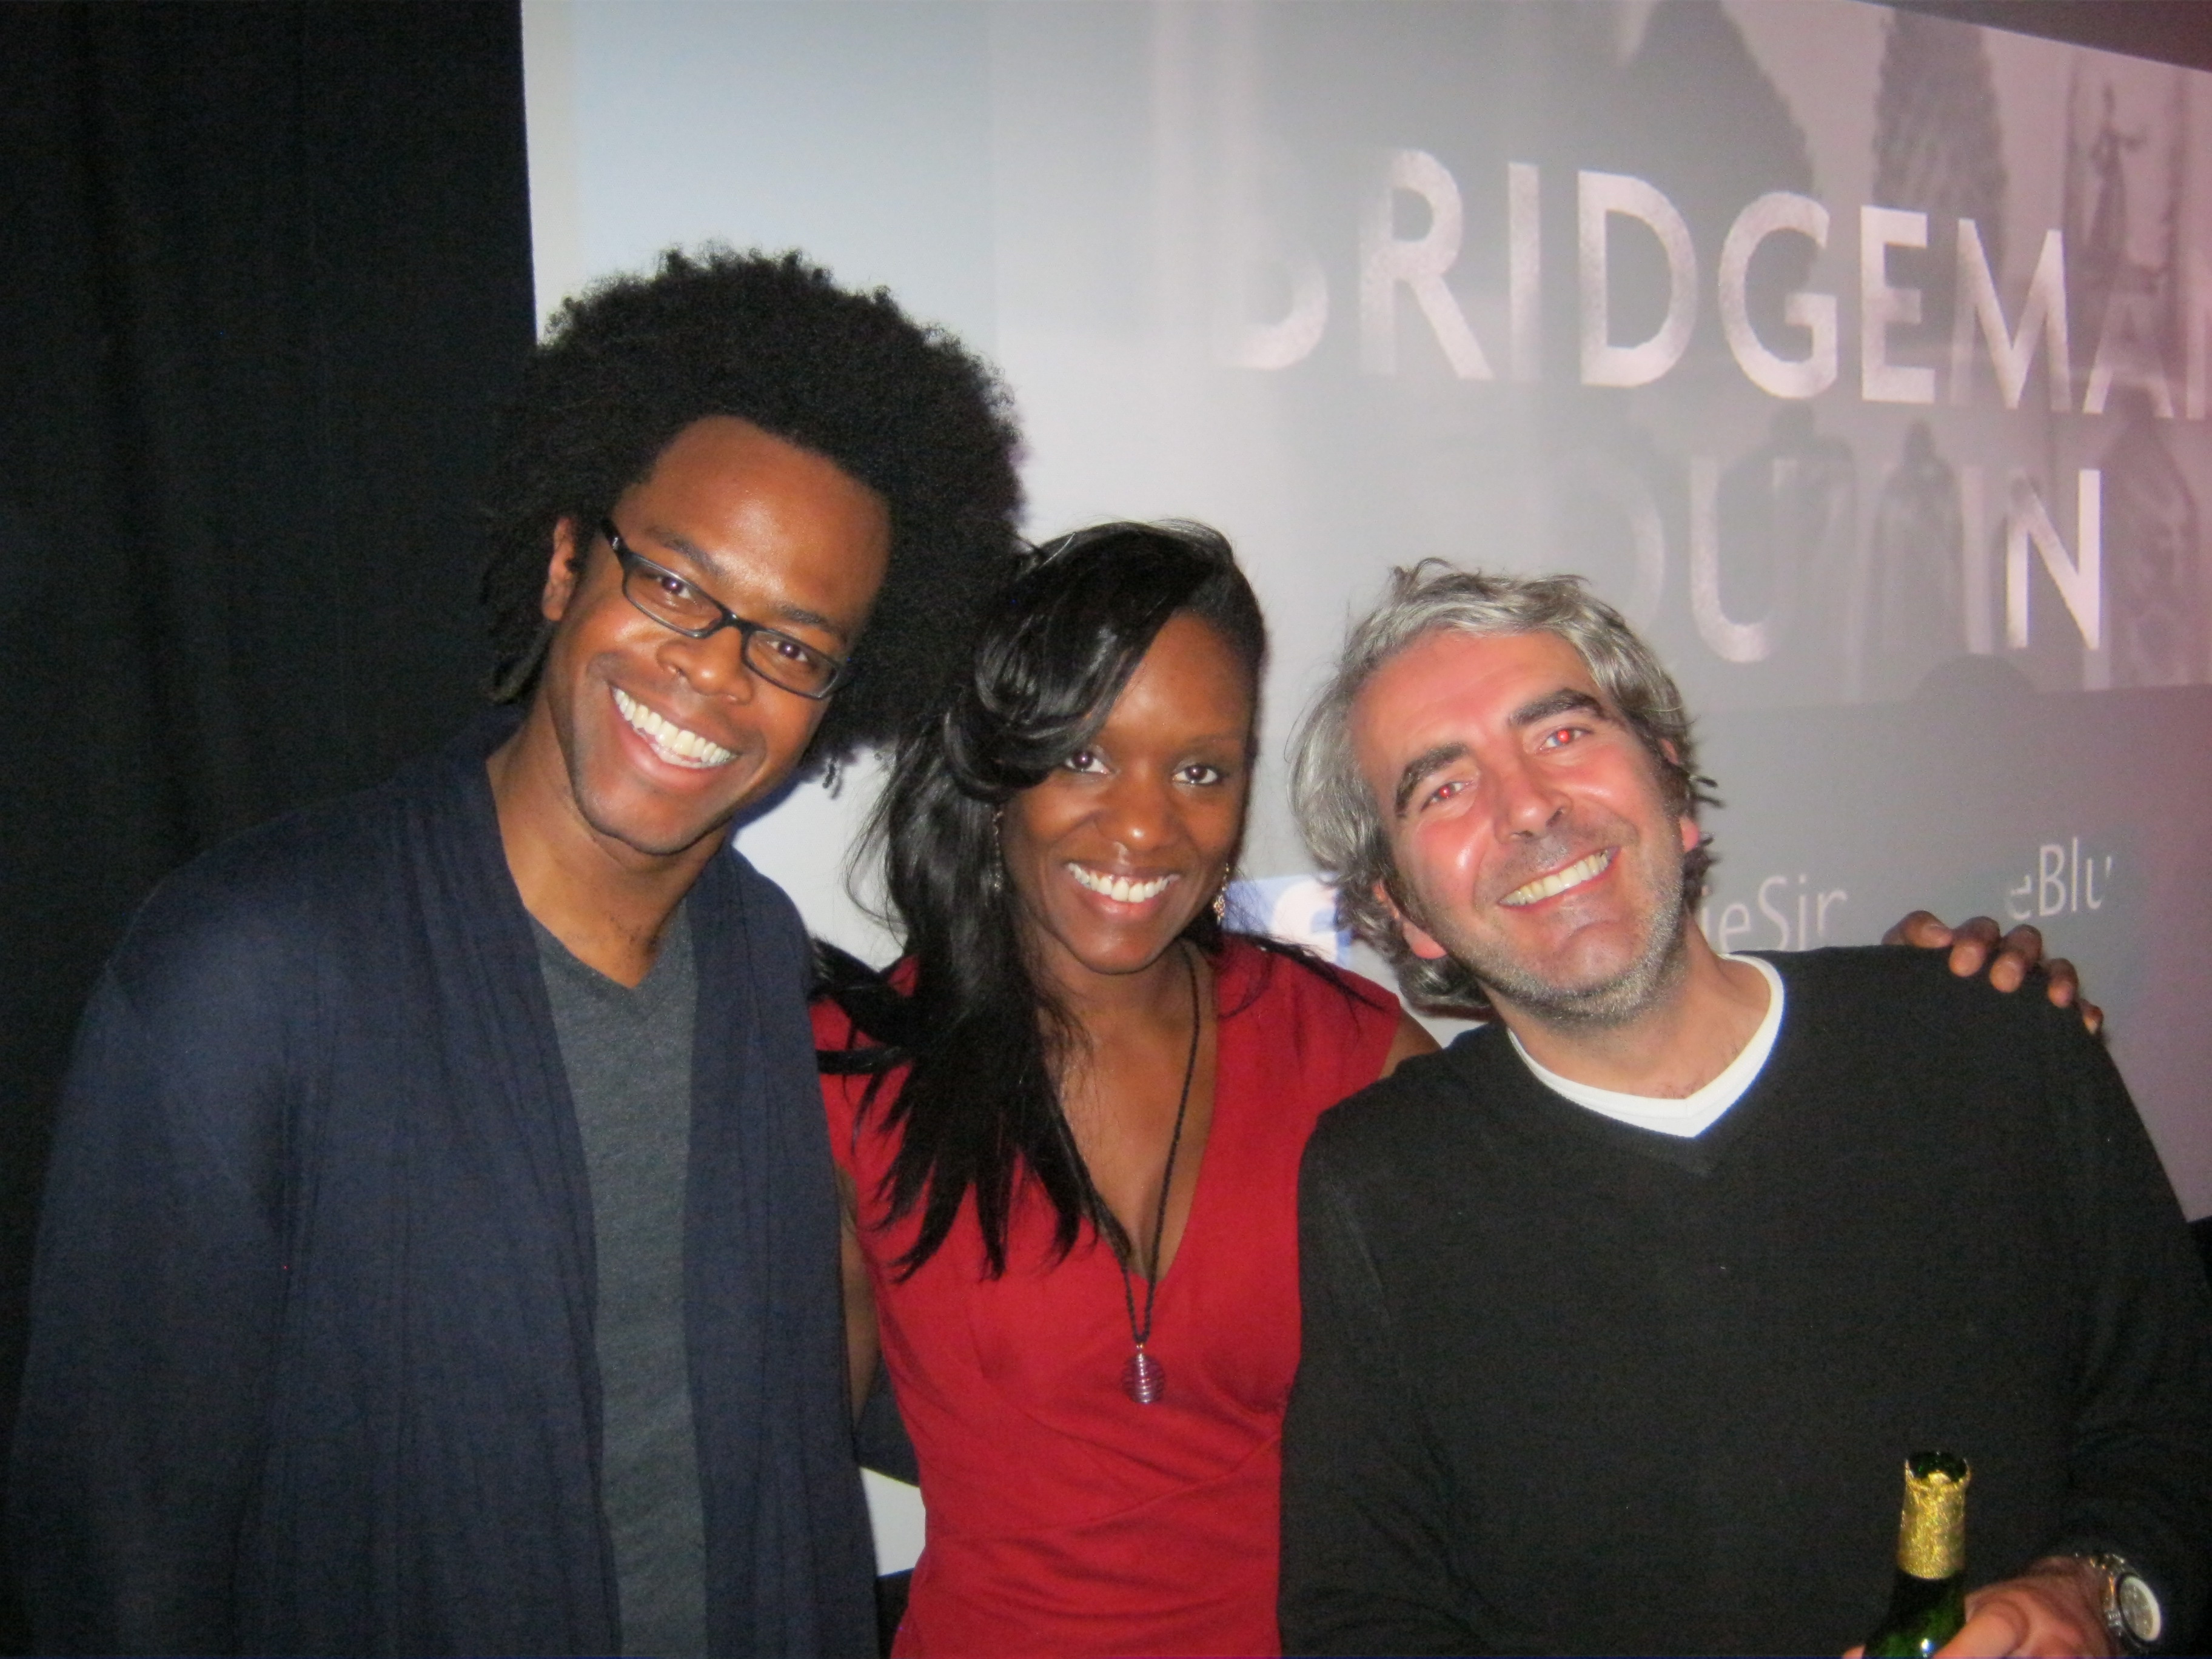 Paul R. Brewster, Media/Festival Consultant, with Kay Bridgeman, Producer, Writer and Actress, and Simon Blake, Director at Magpie Sings The Blues private screening at Soho House,London